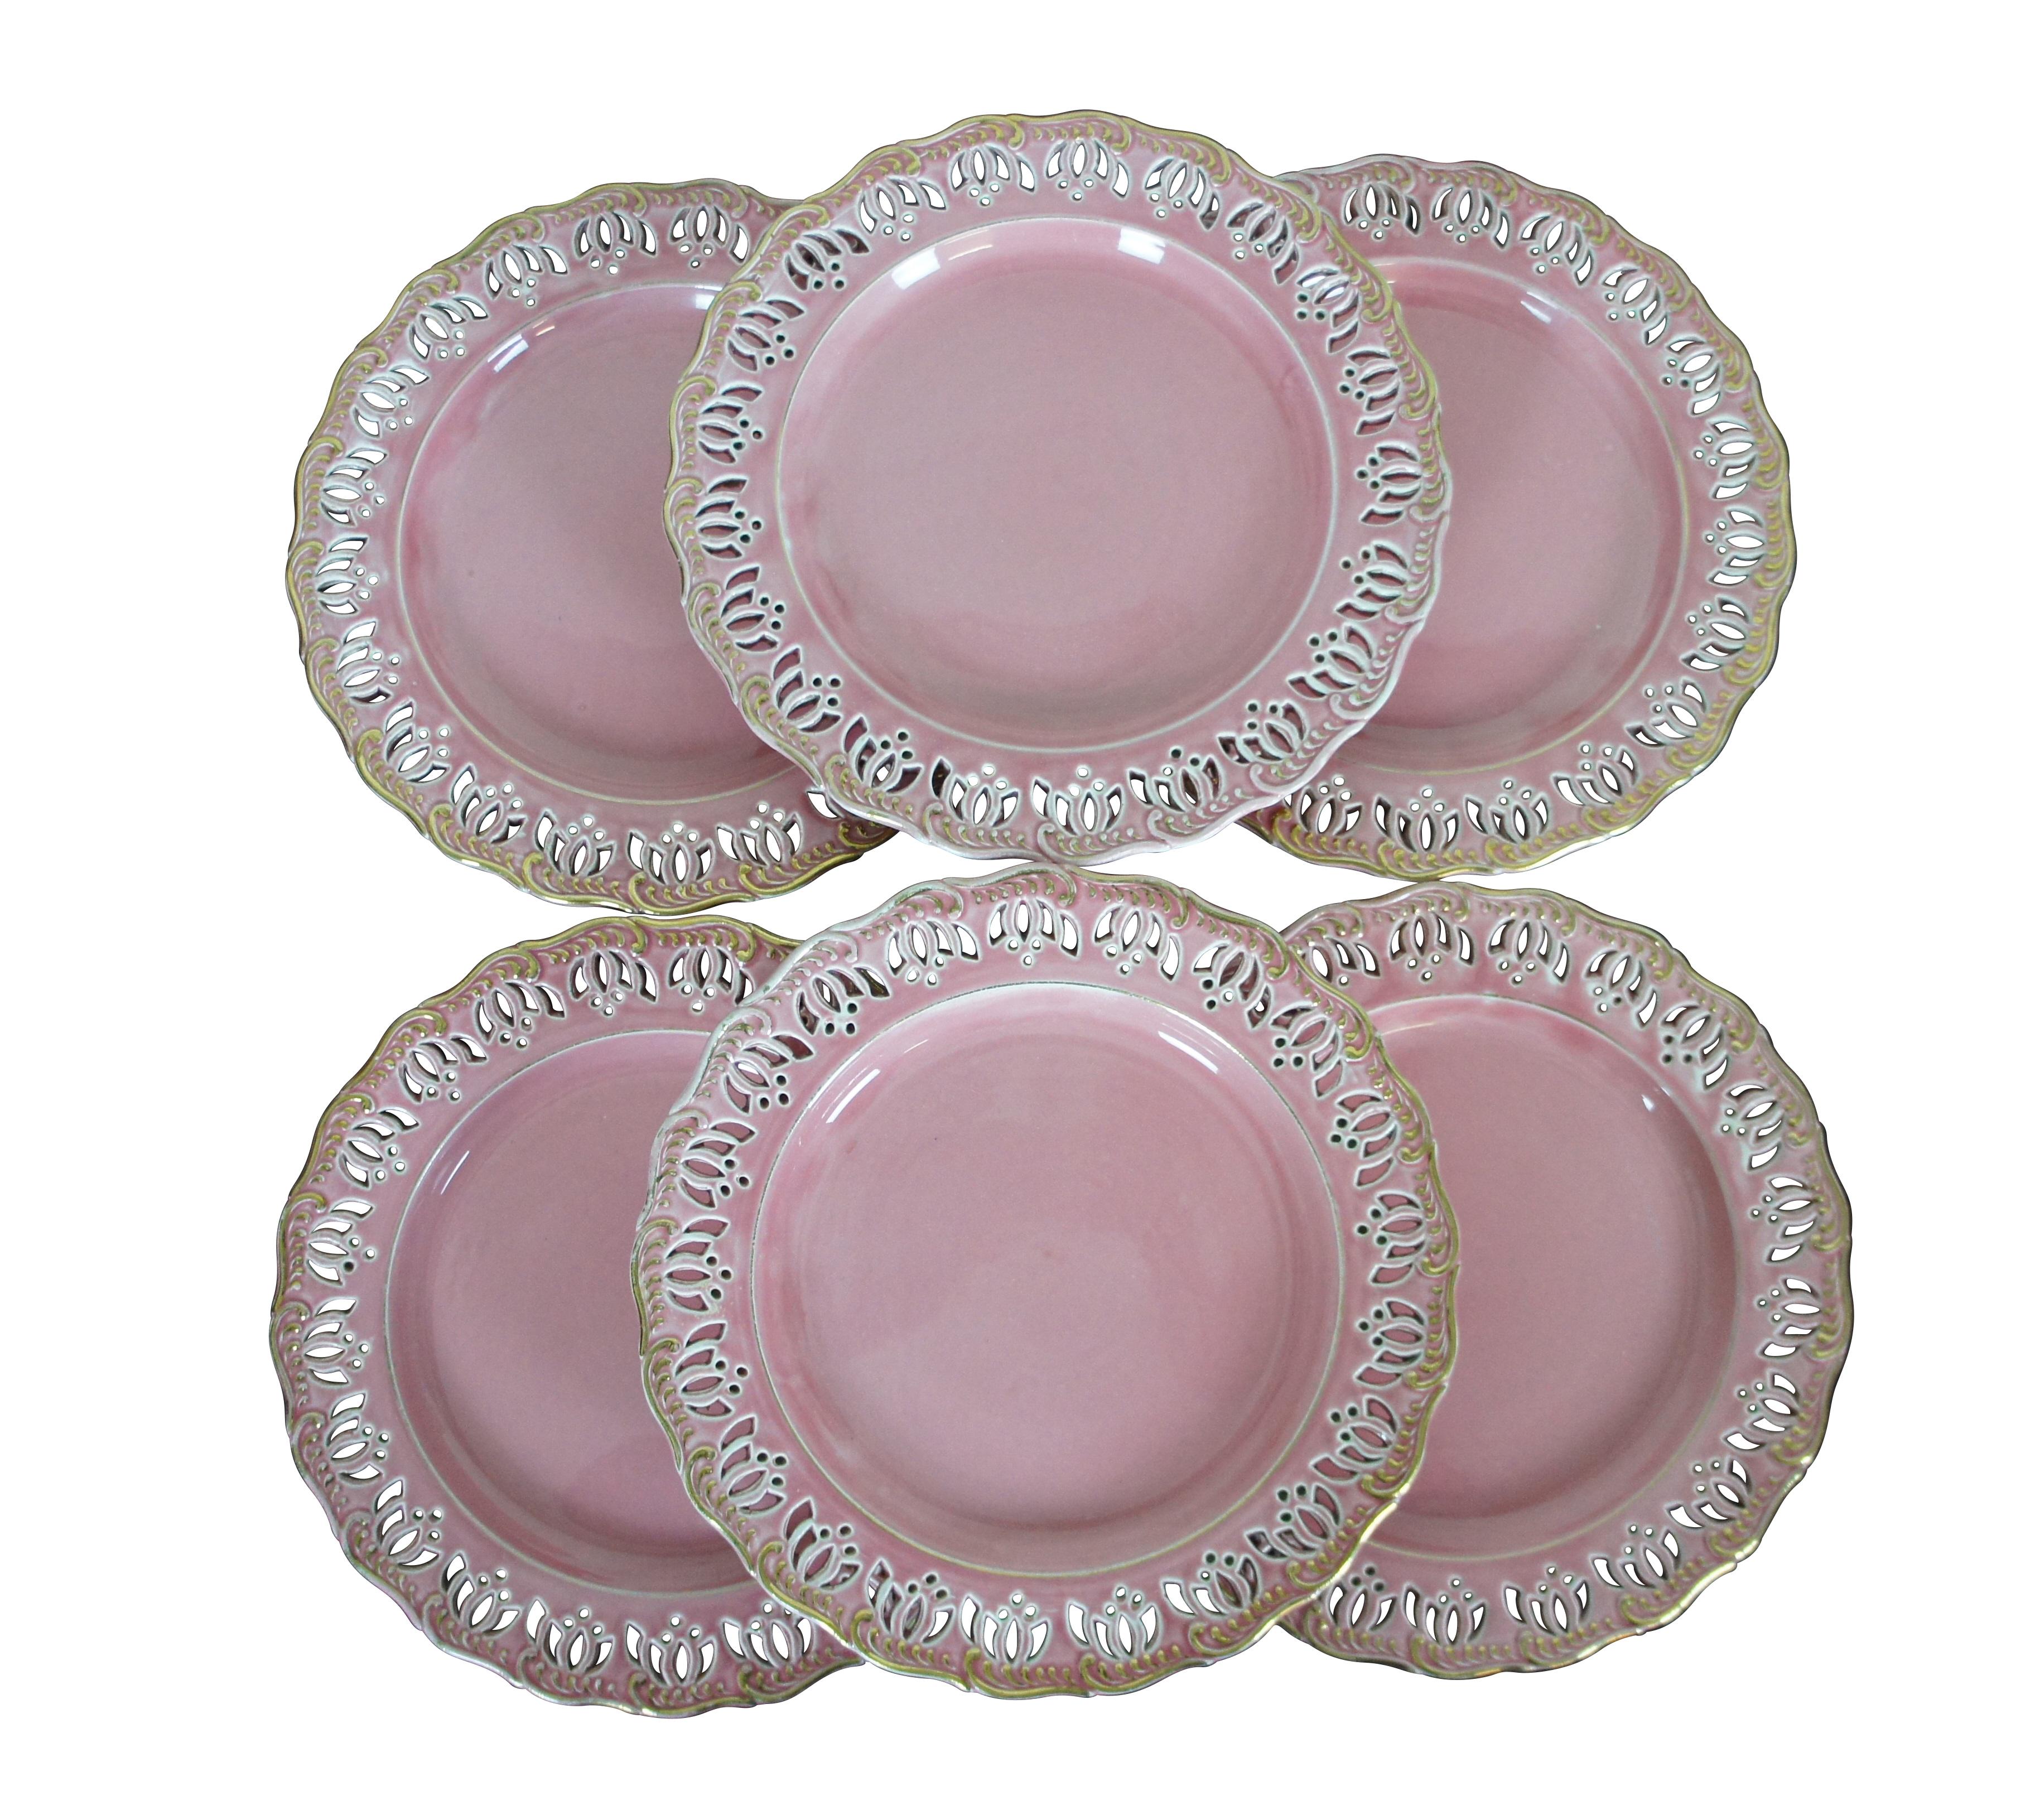 Six antique Austrian / Hungarian pink stoneware plates featuring a scalloped pierced lotus flower design.  Marked with Vienna beehive and F Y W.

Dimensions:
8.5